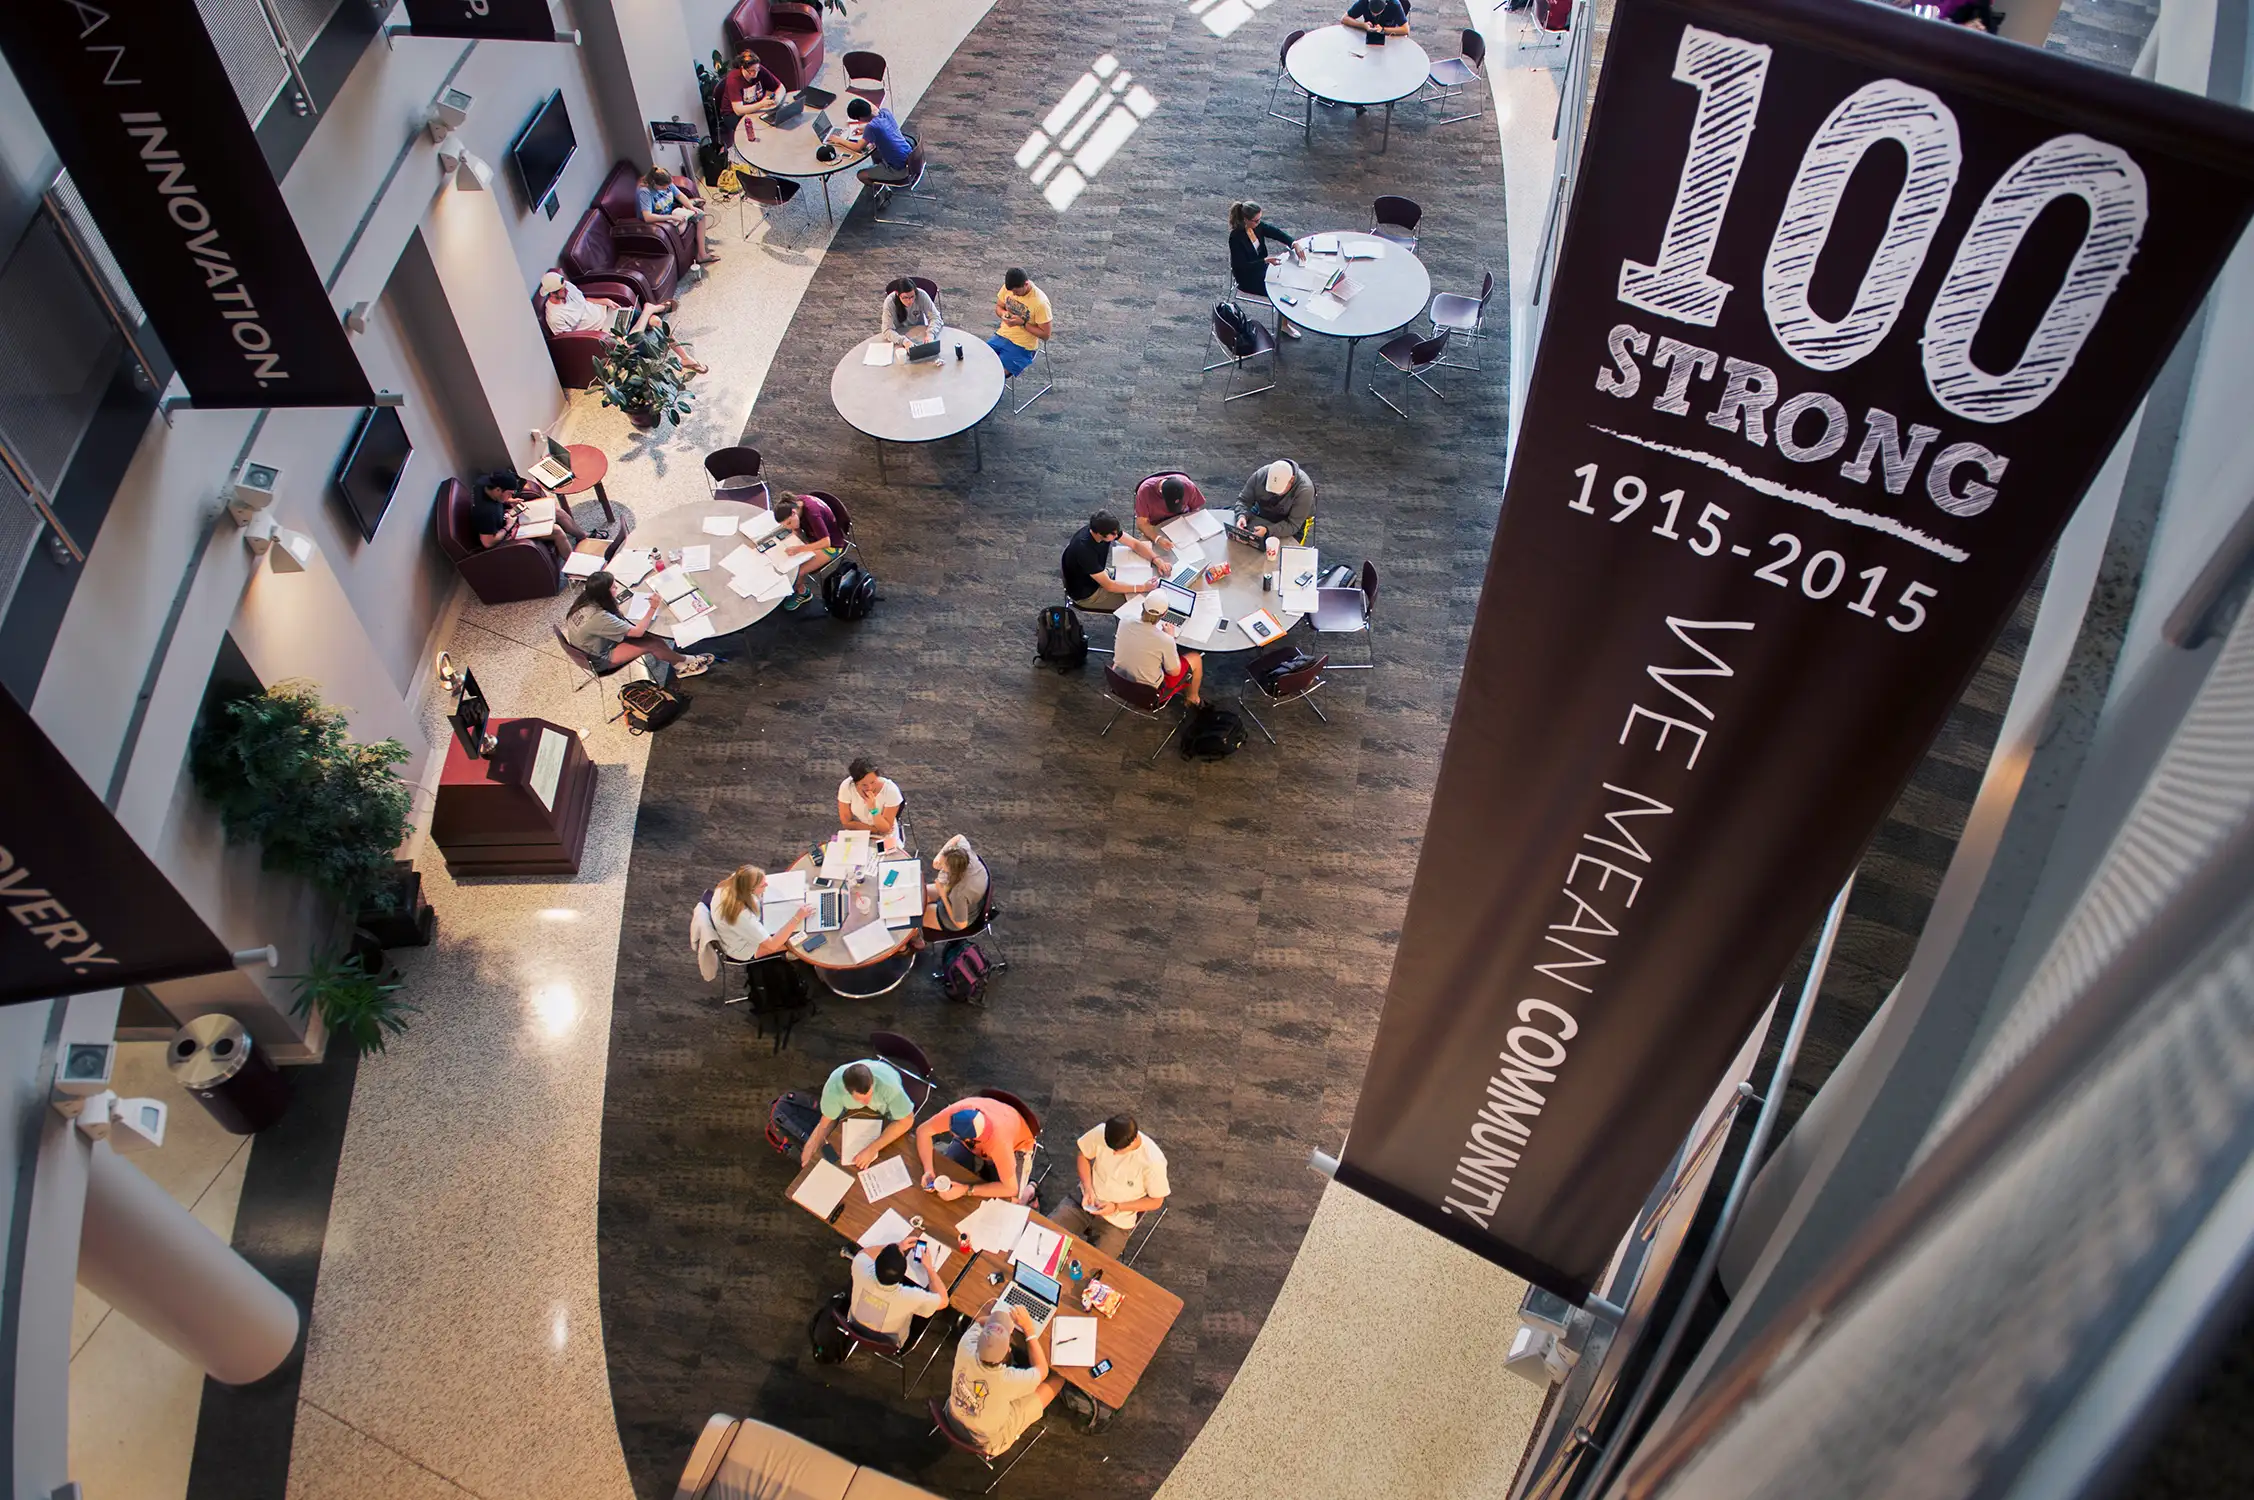 Inspirational banners in McCool Hall. (photo by Raeley Stevens / © Mississippi State University)